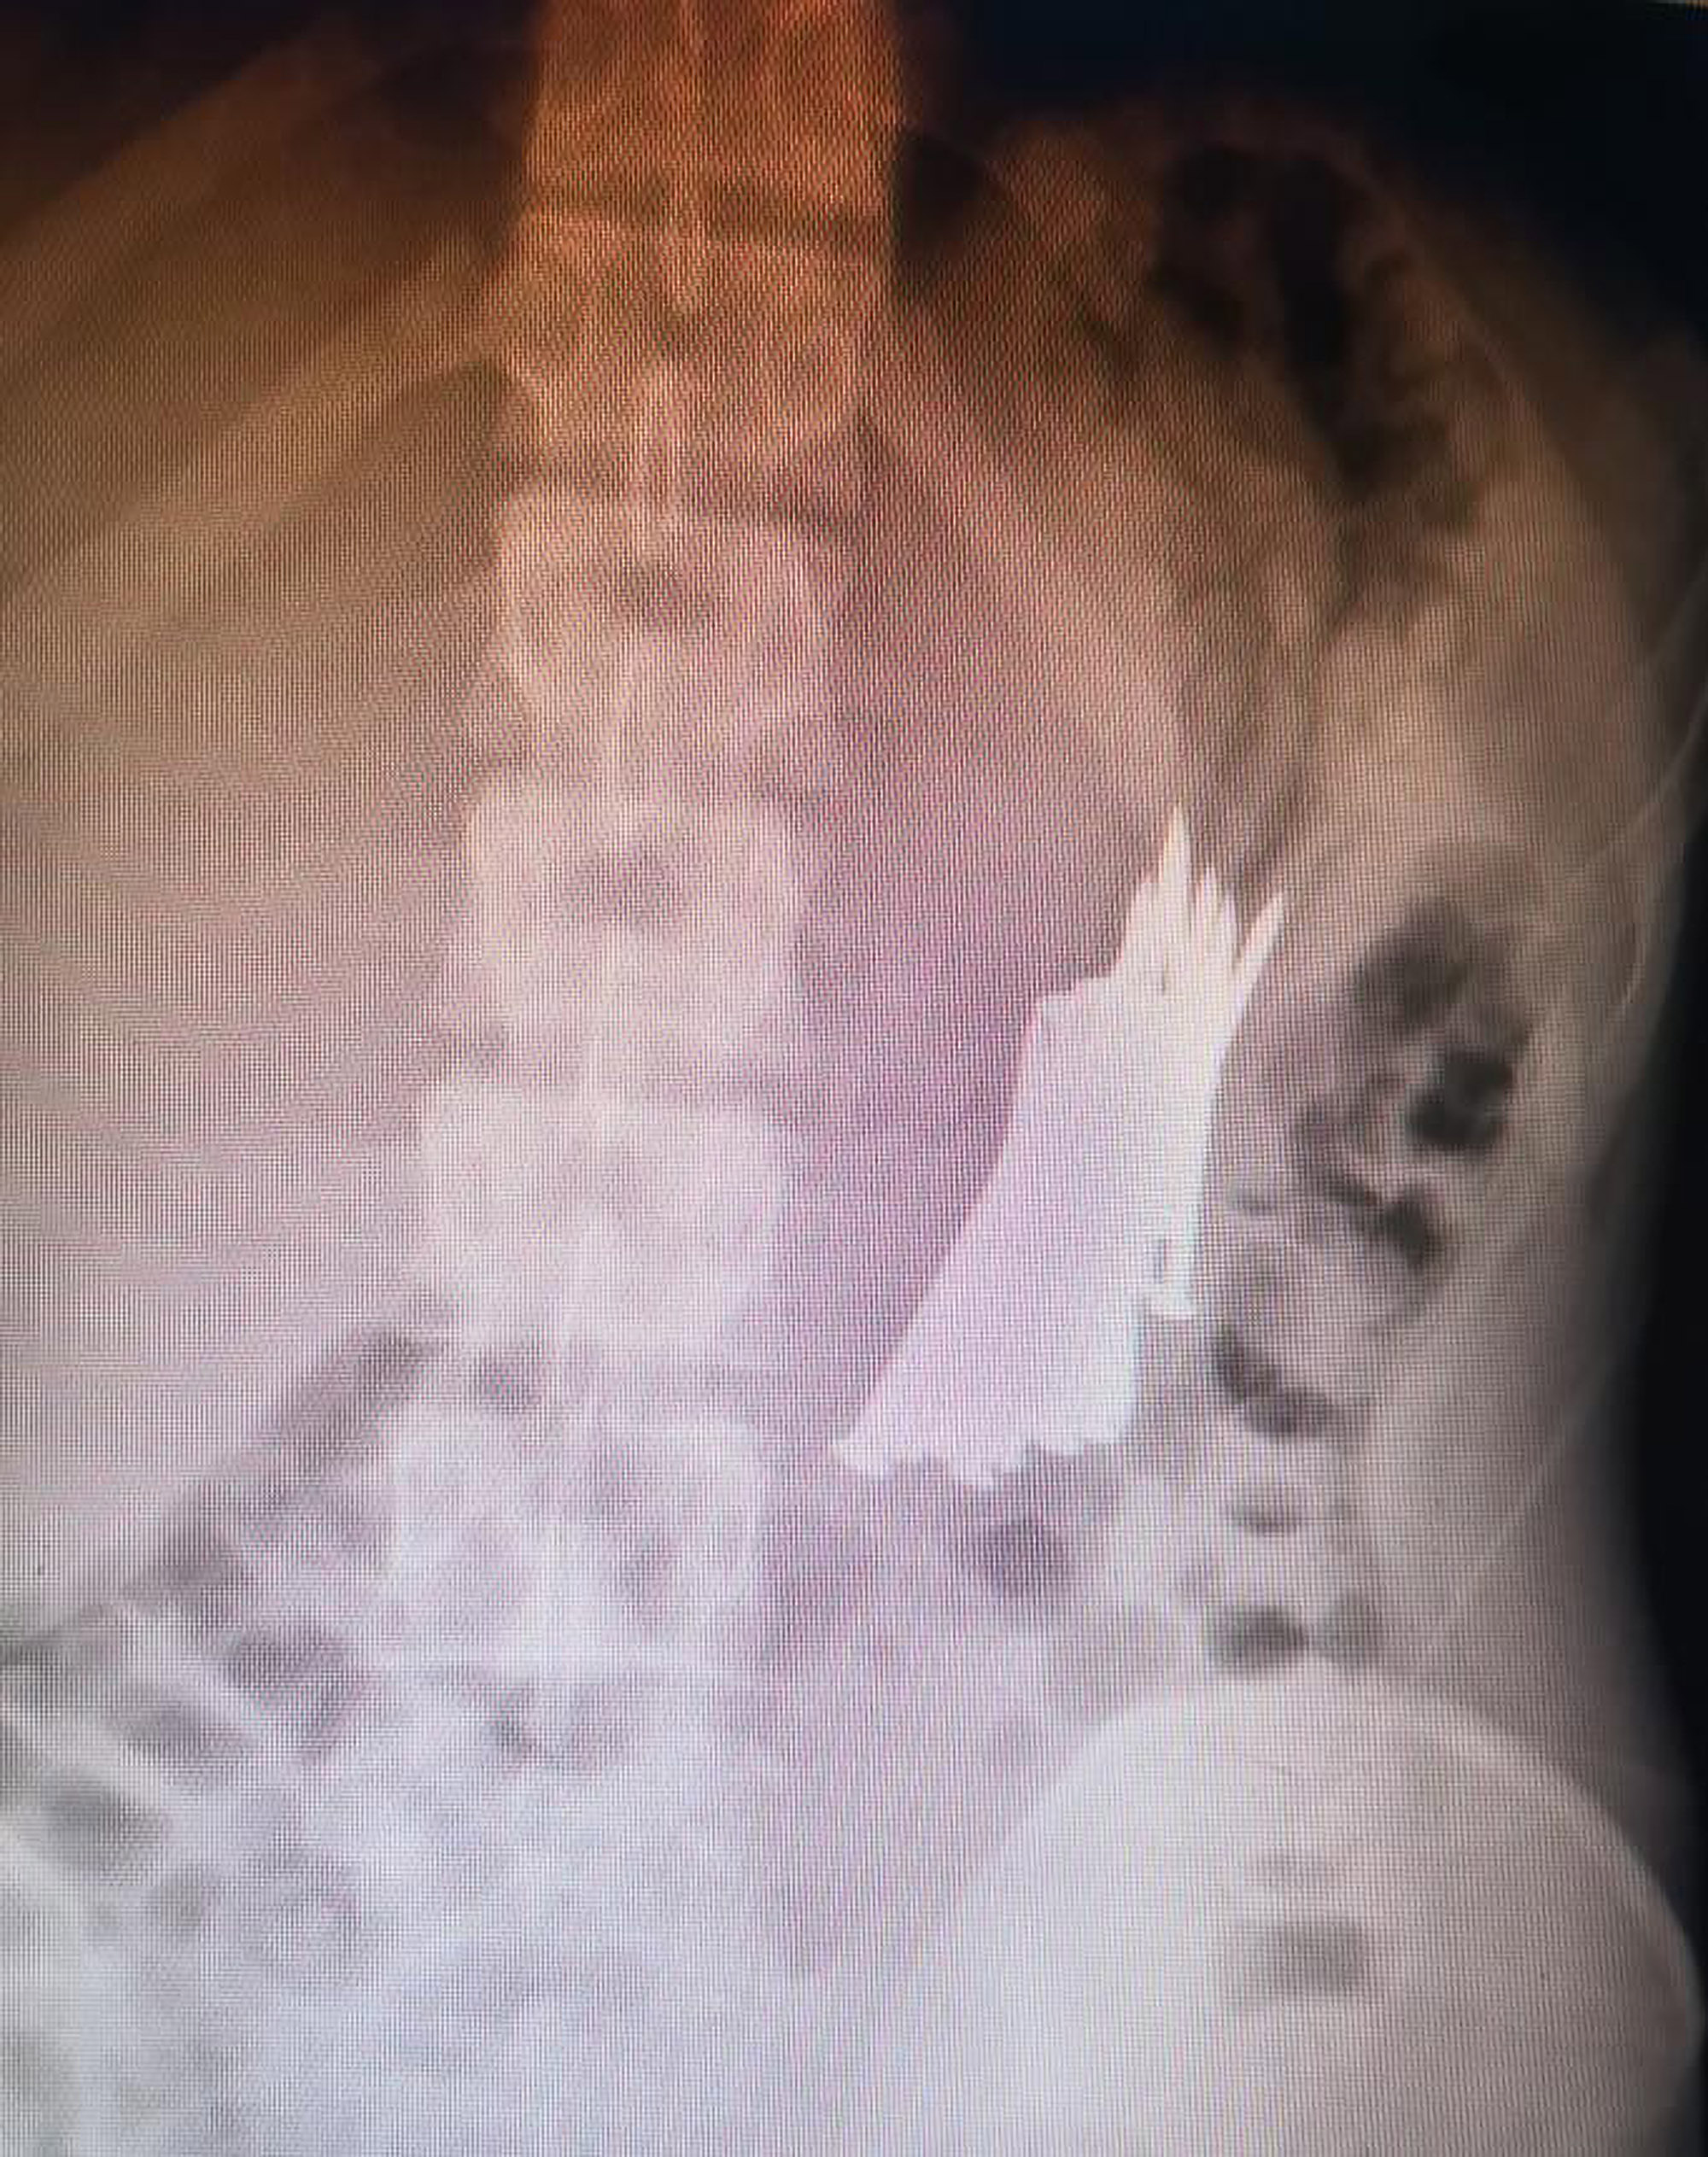 Read more about the article Chinese Man Has 36 Metal Nails Removed From Gut After Swallowing Them In Bad Mood